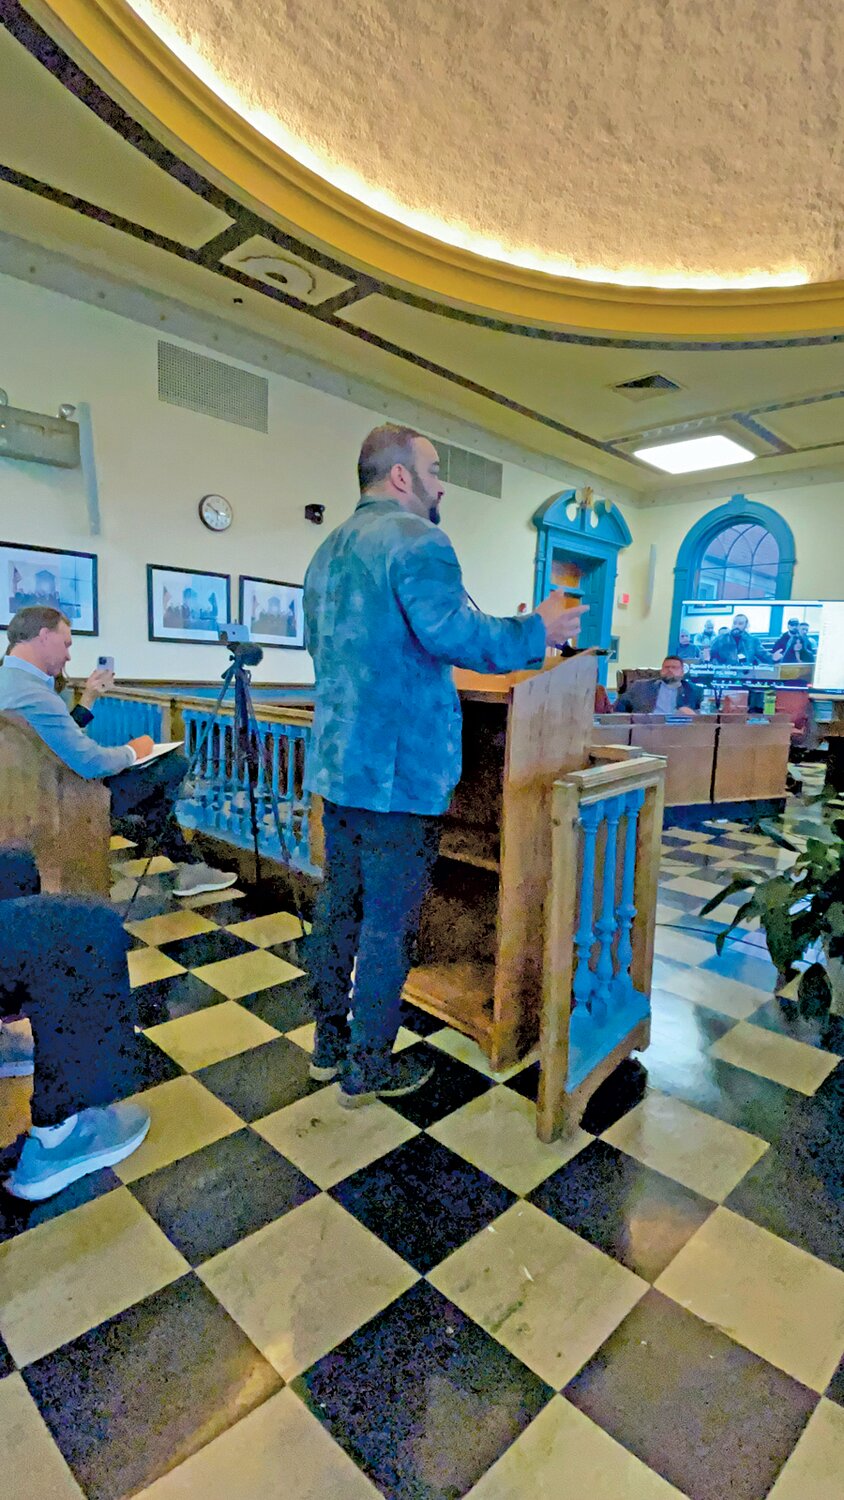 HE IS ALL IN FOR CRANSTON: Former Councilman and current owner of the Park Theater, Ed Brady educates the City Council on the importance of a true community center in the heart of Cranston. (Cranston Herald photo)